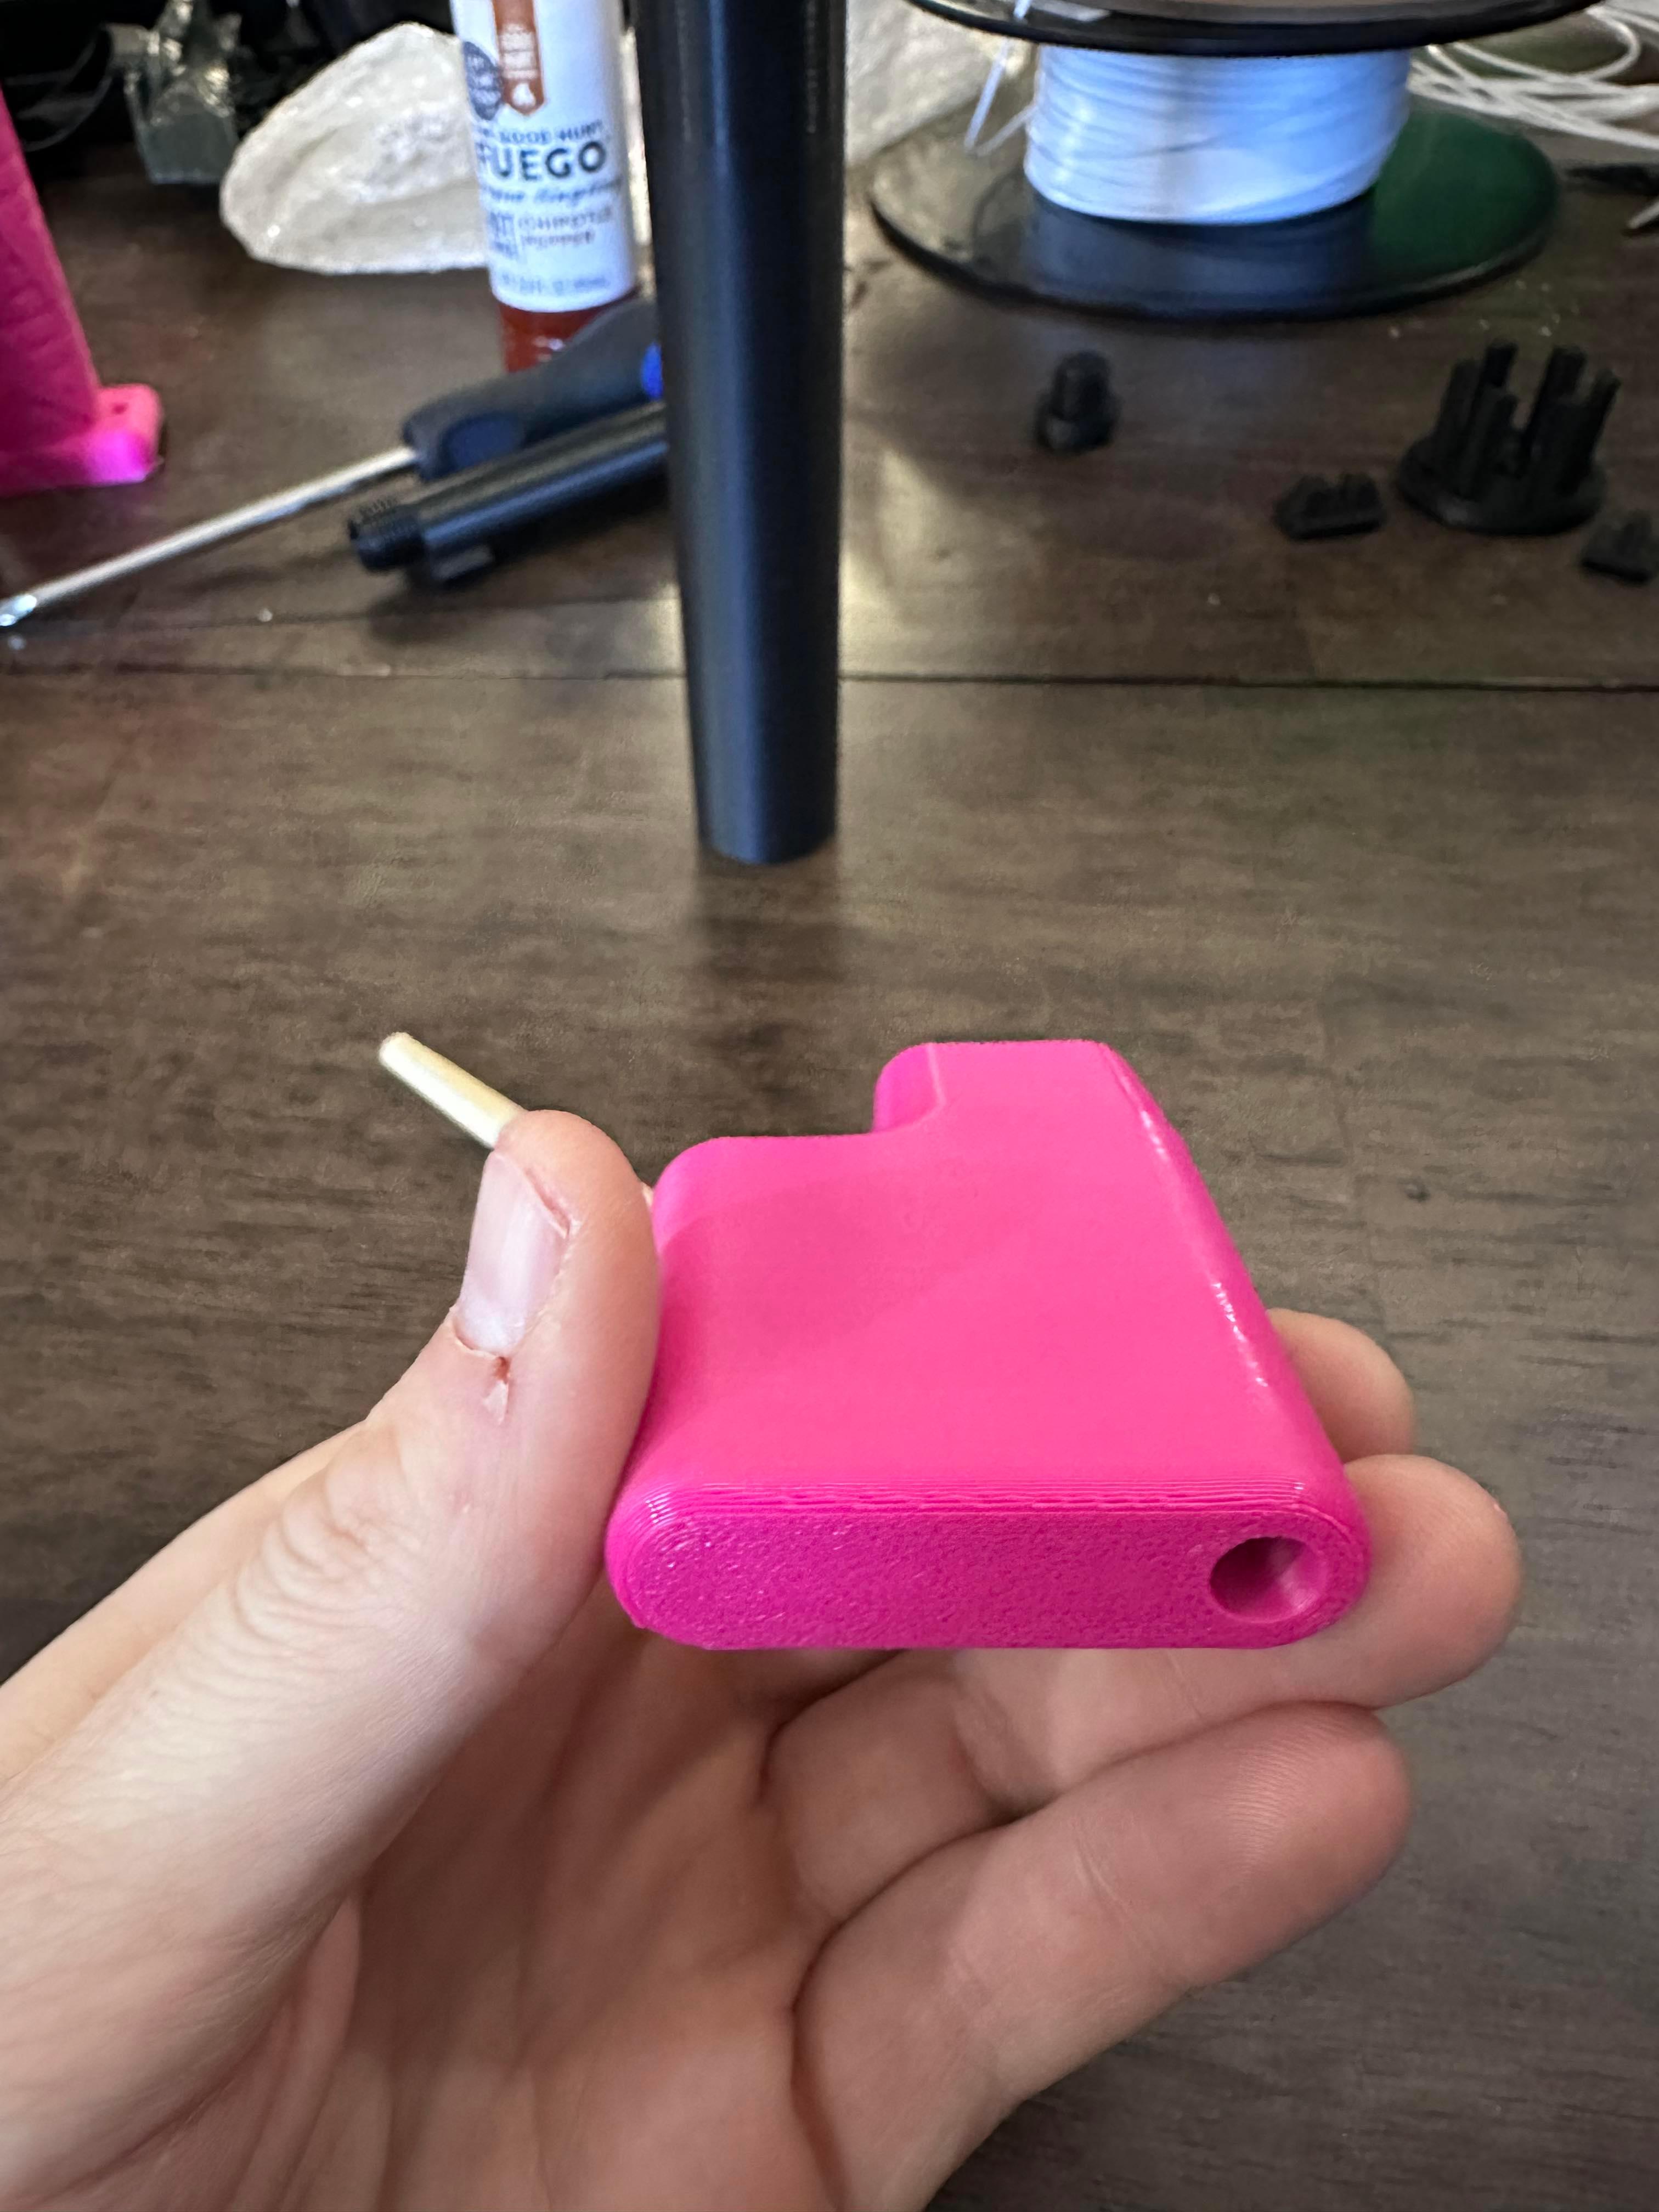 The Inpersovapor 3d model